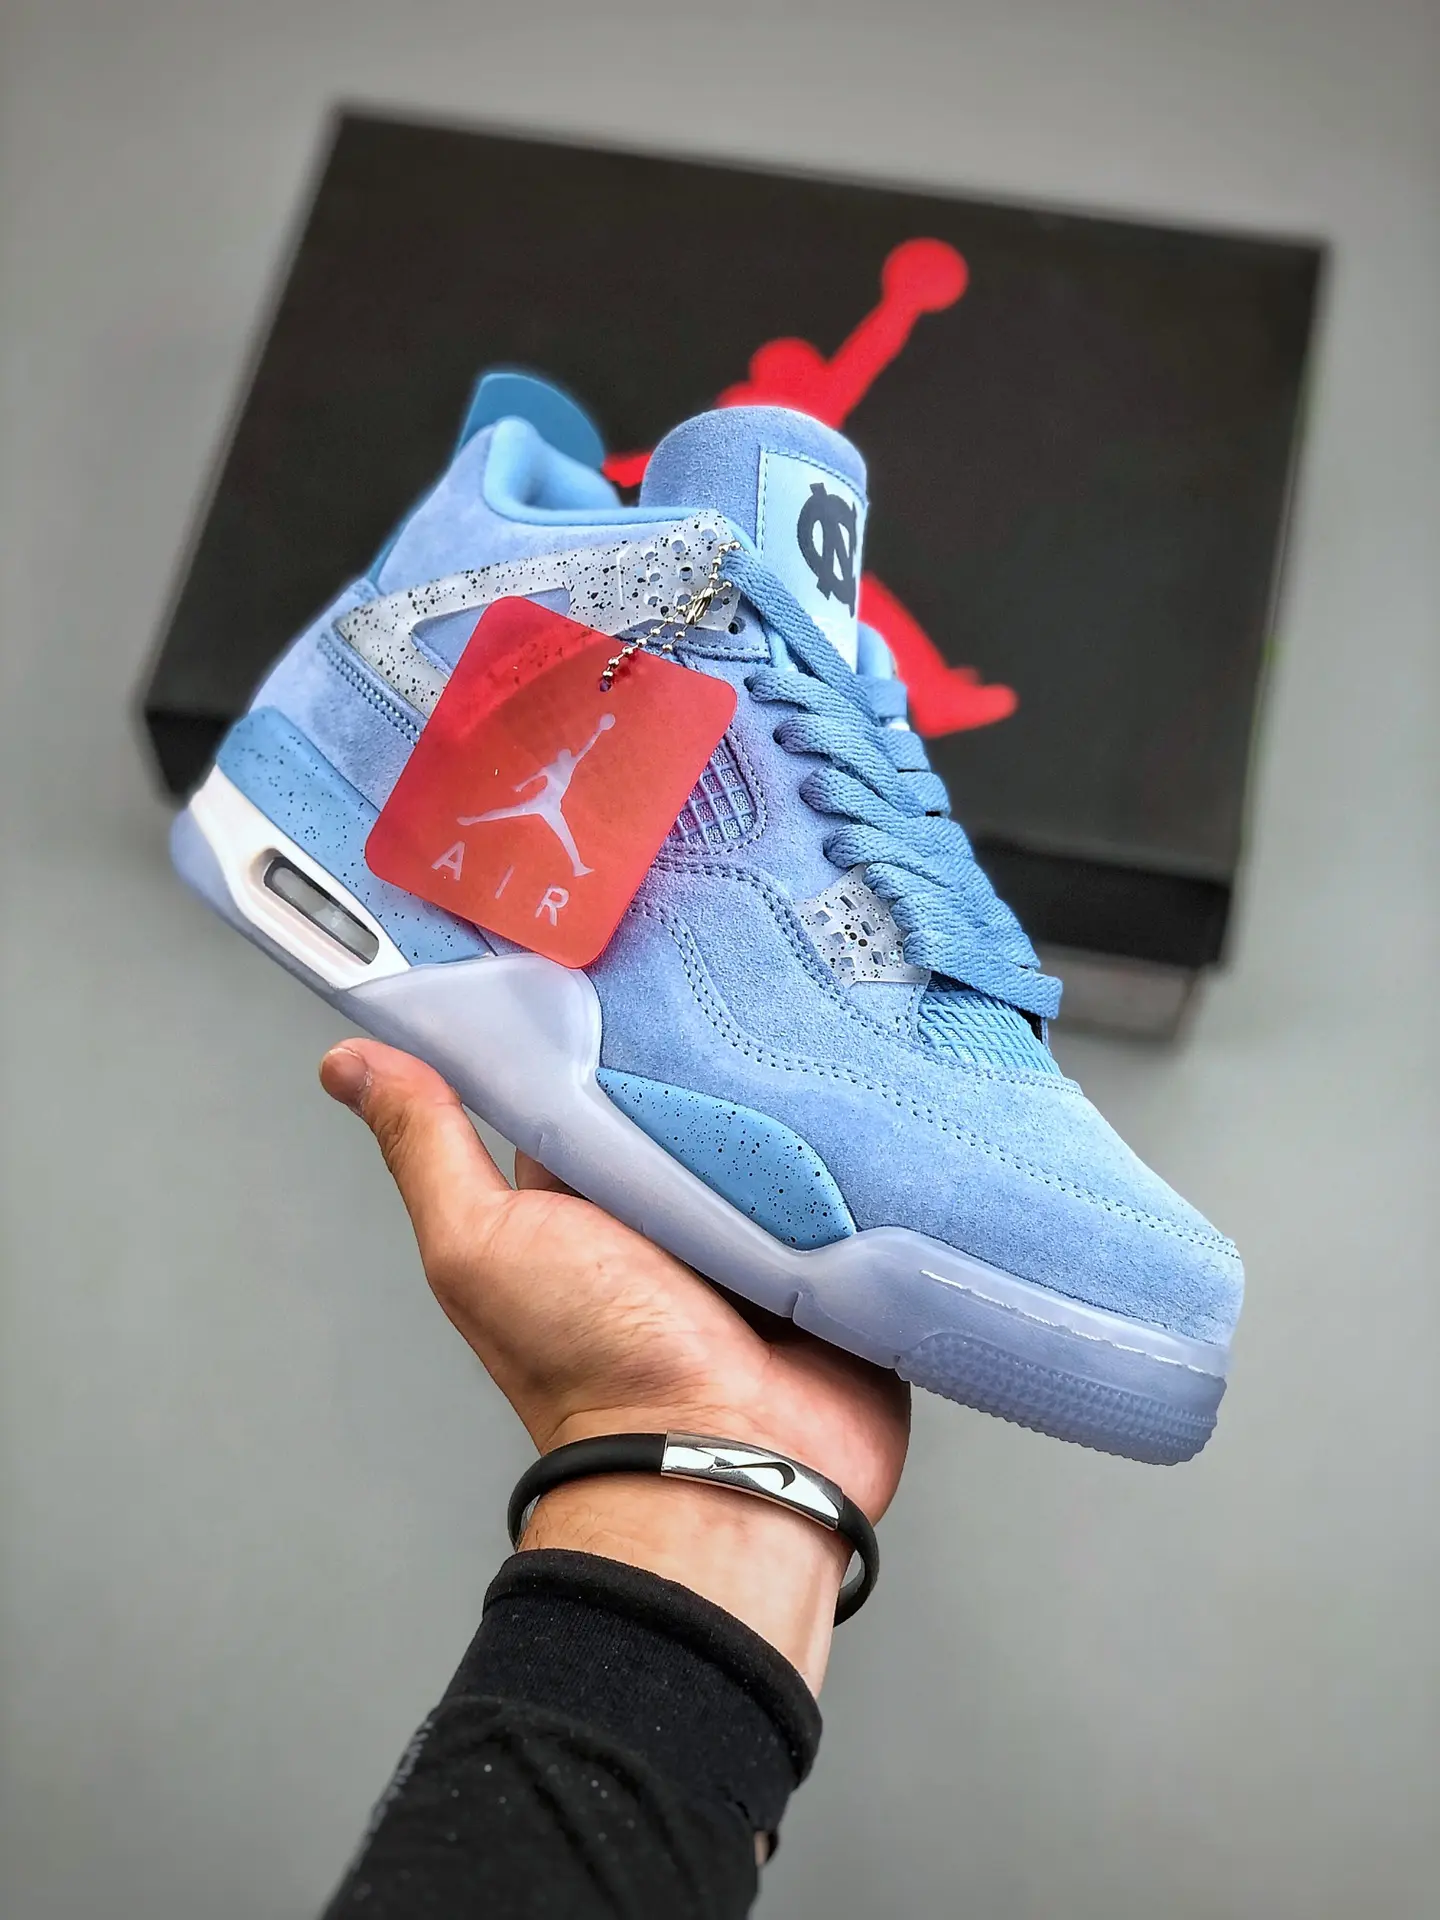 How To Lace Jordan 4? The Ultimate Guide to Lacing and Styling Jordan 4 Sneakers | YtaYta